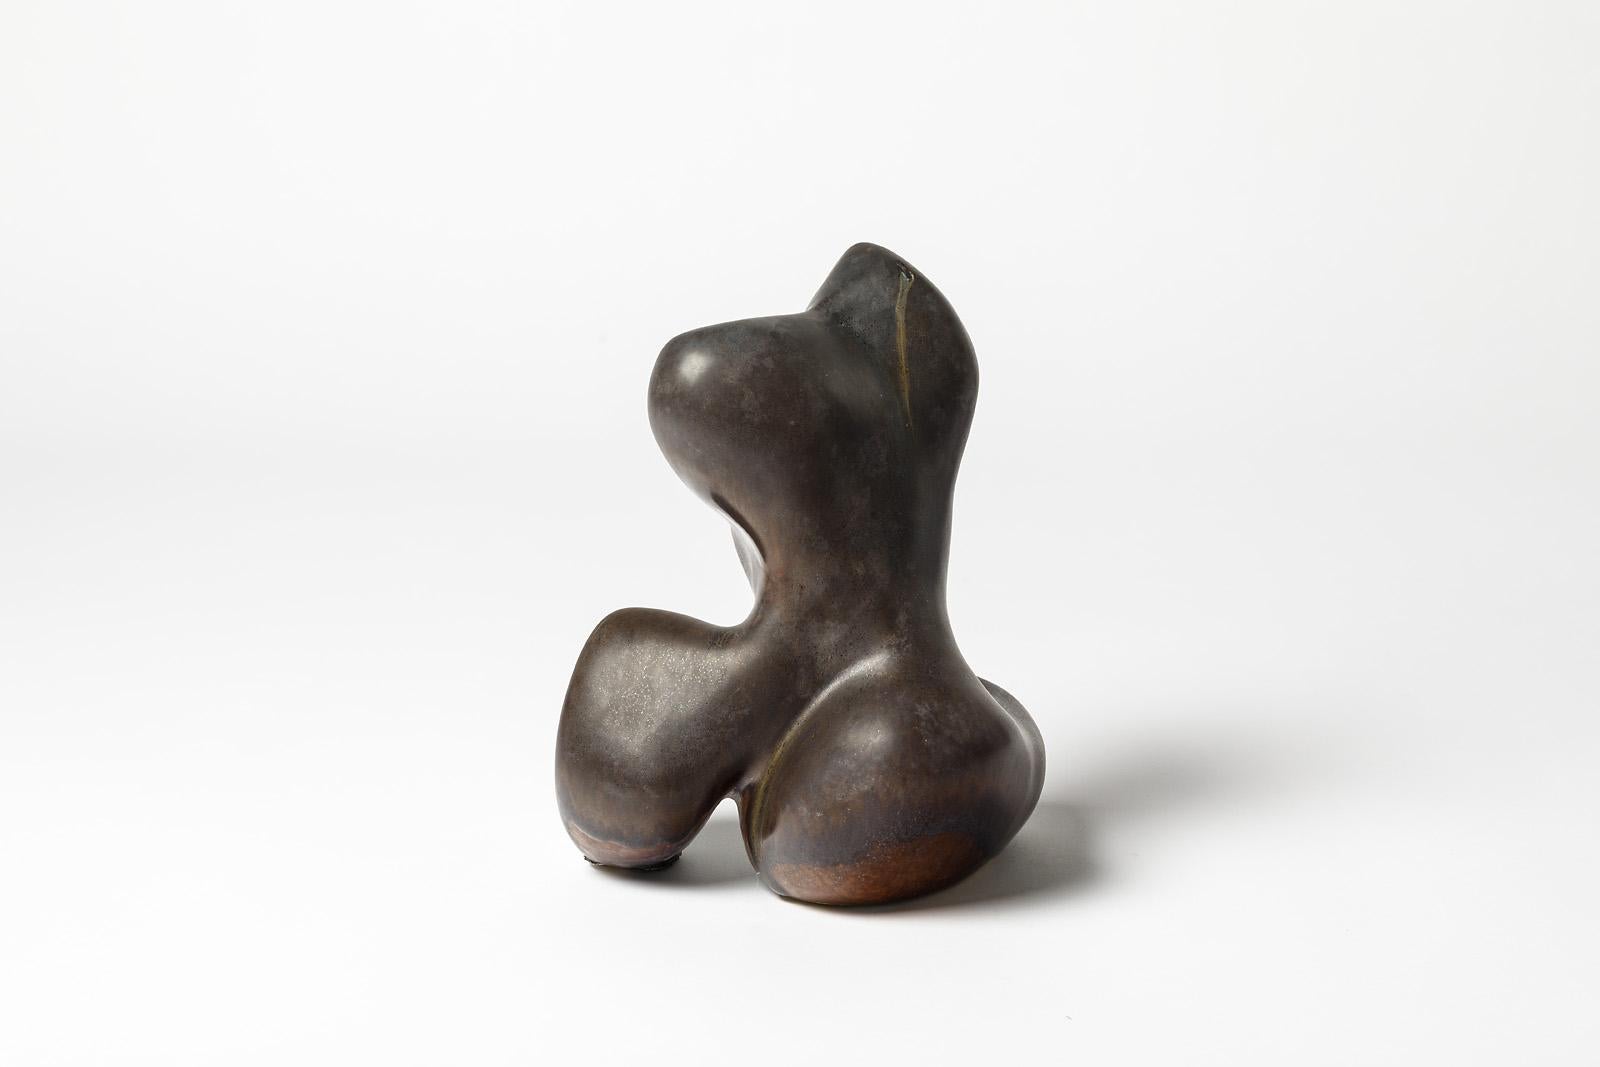 French Porcelain Sculpture with Black- Brown Glaze Decoration by Tim Orr, circa 1970